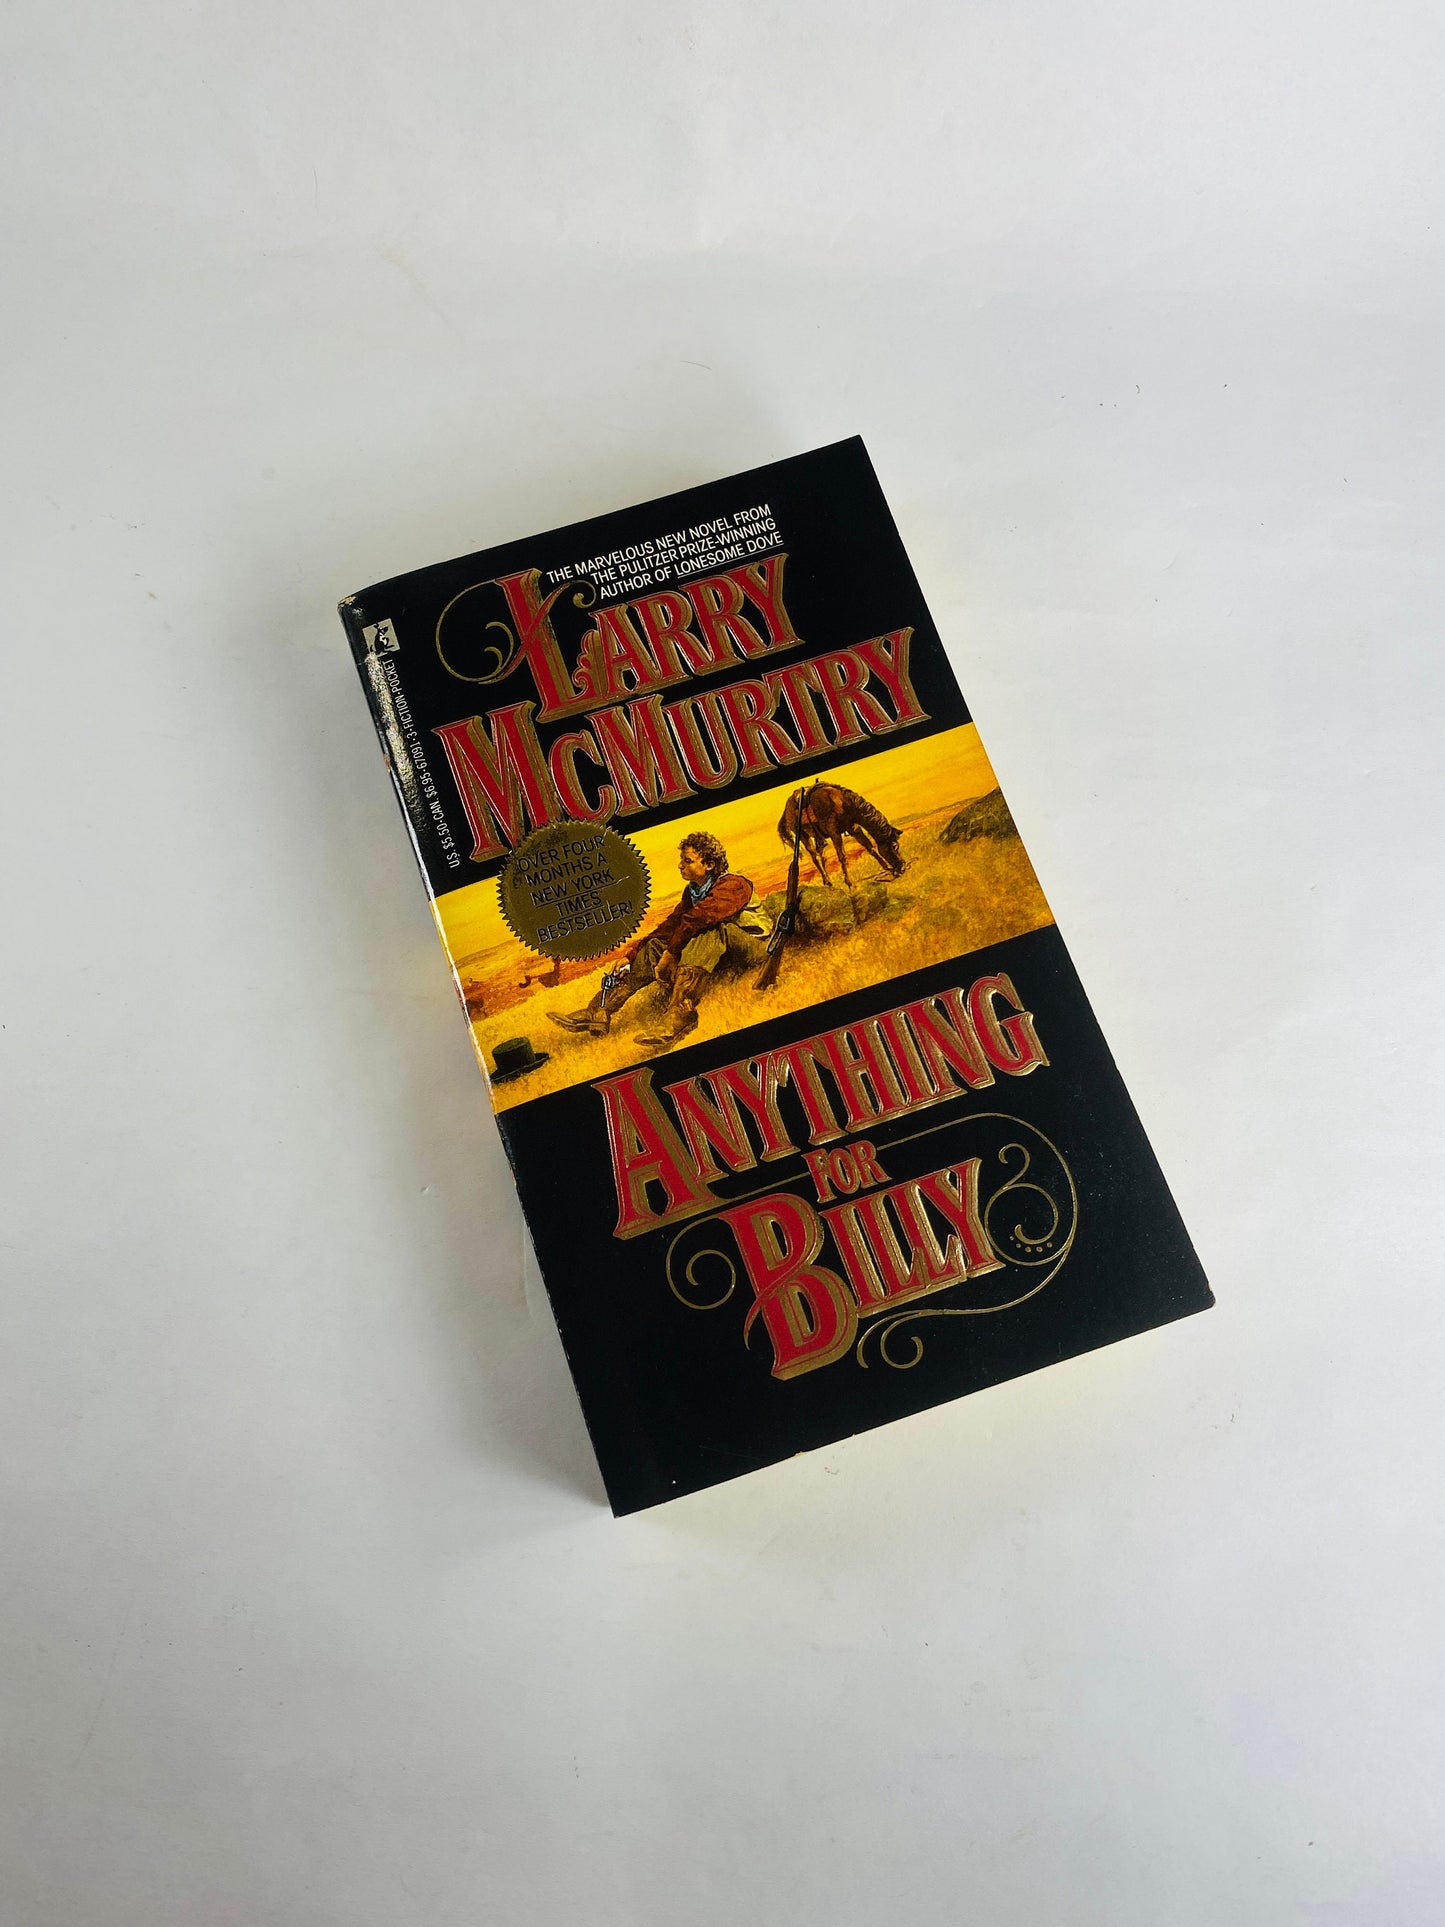 1988 Larry McMurtry Anything for Billy FIRST PRINTING vintage paperback book about Billy the Kid outlaw Texas